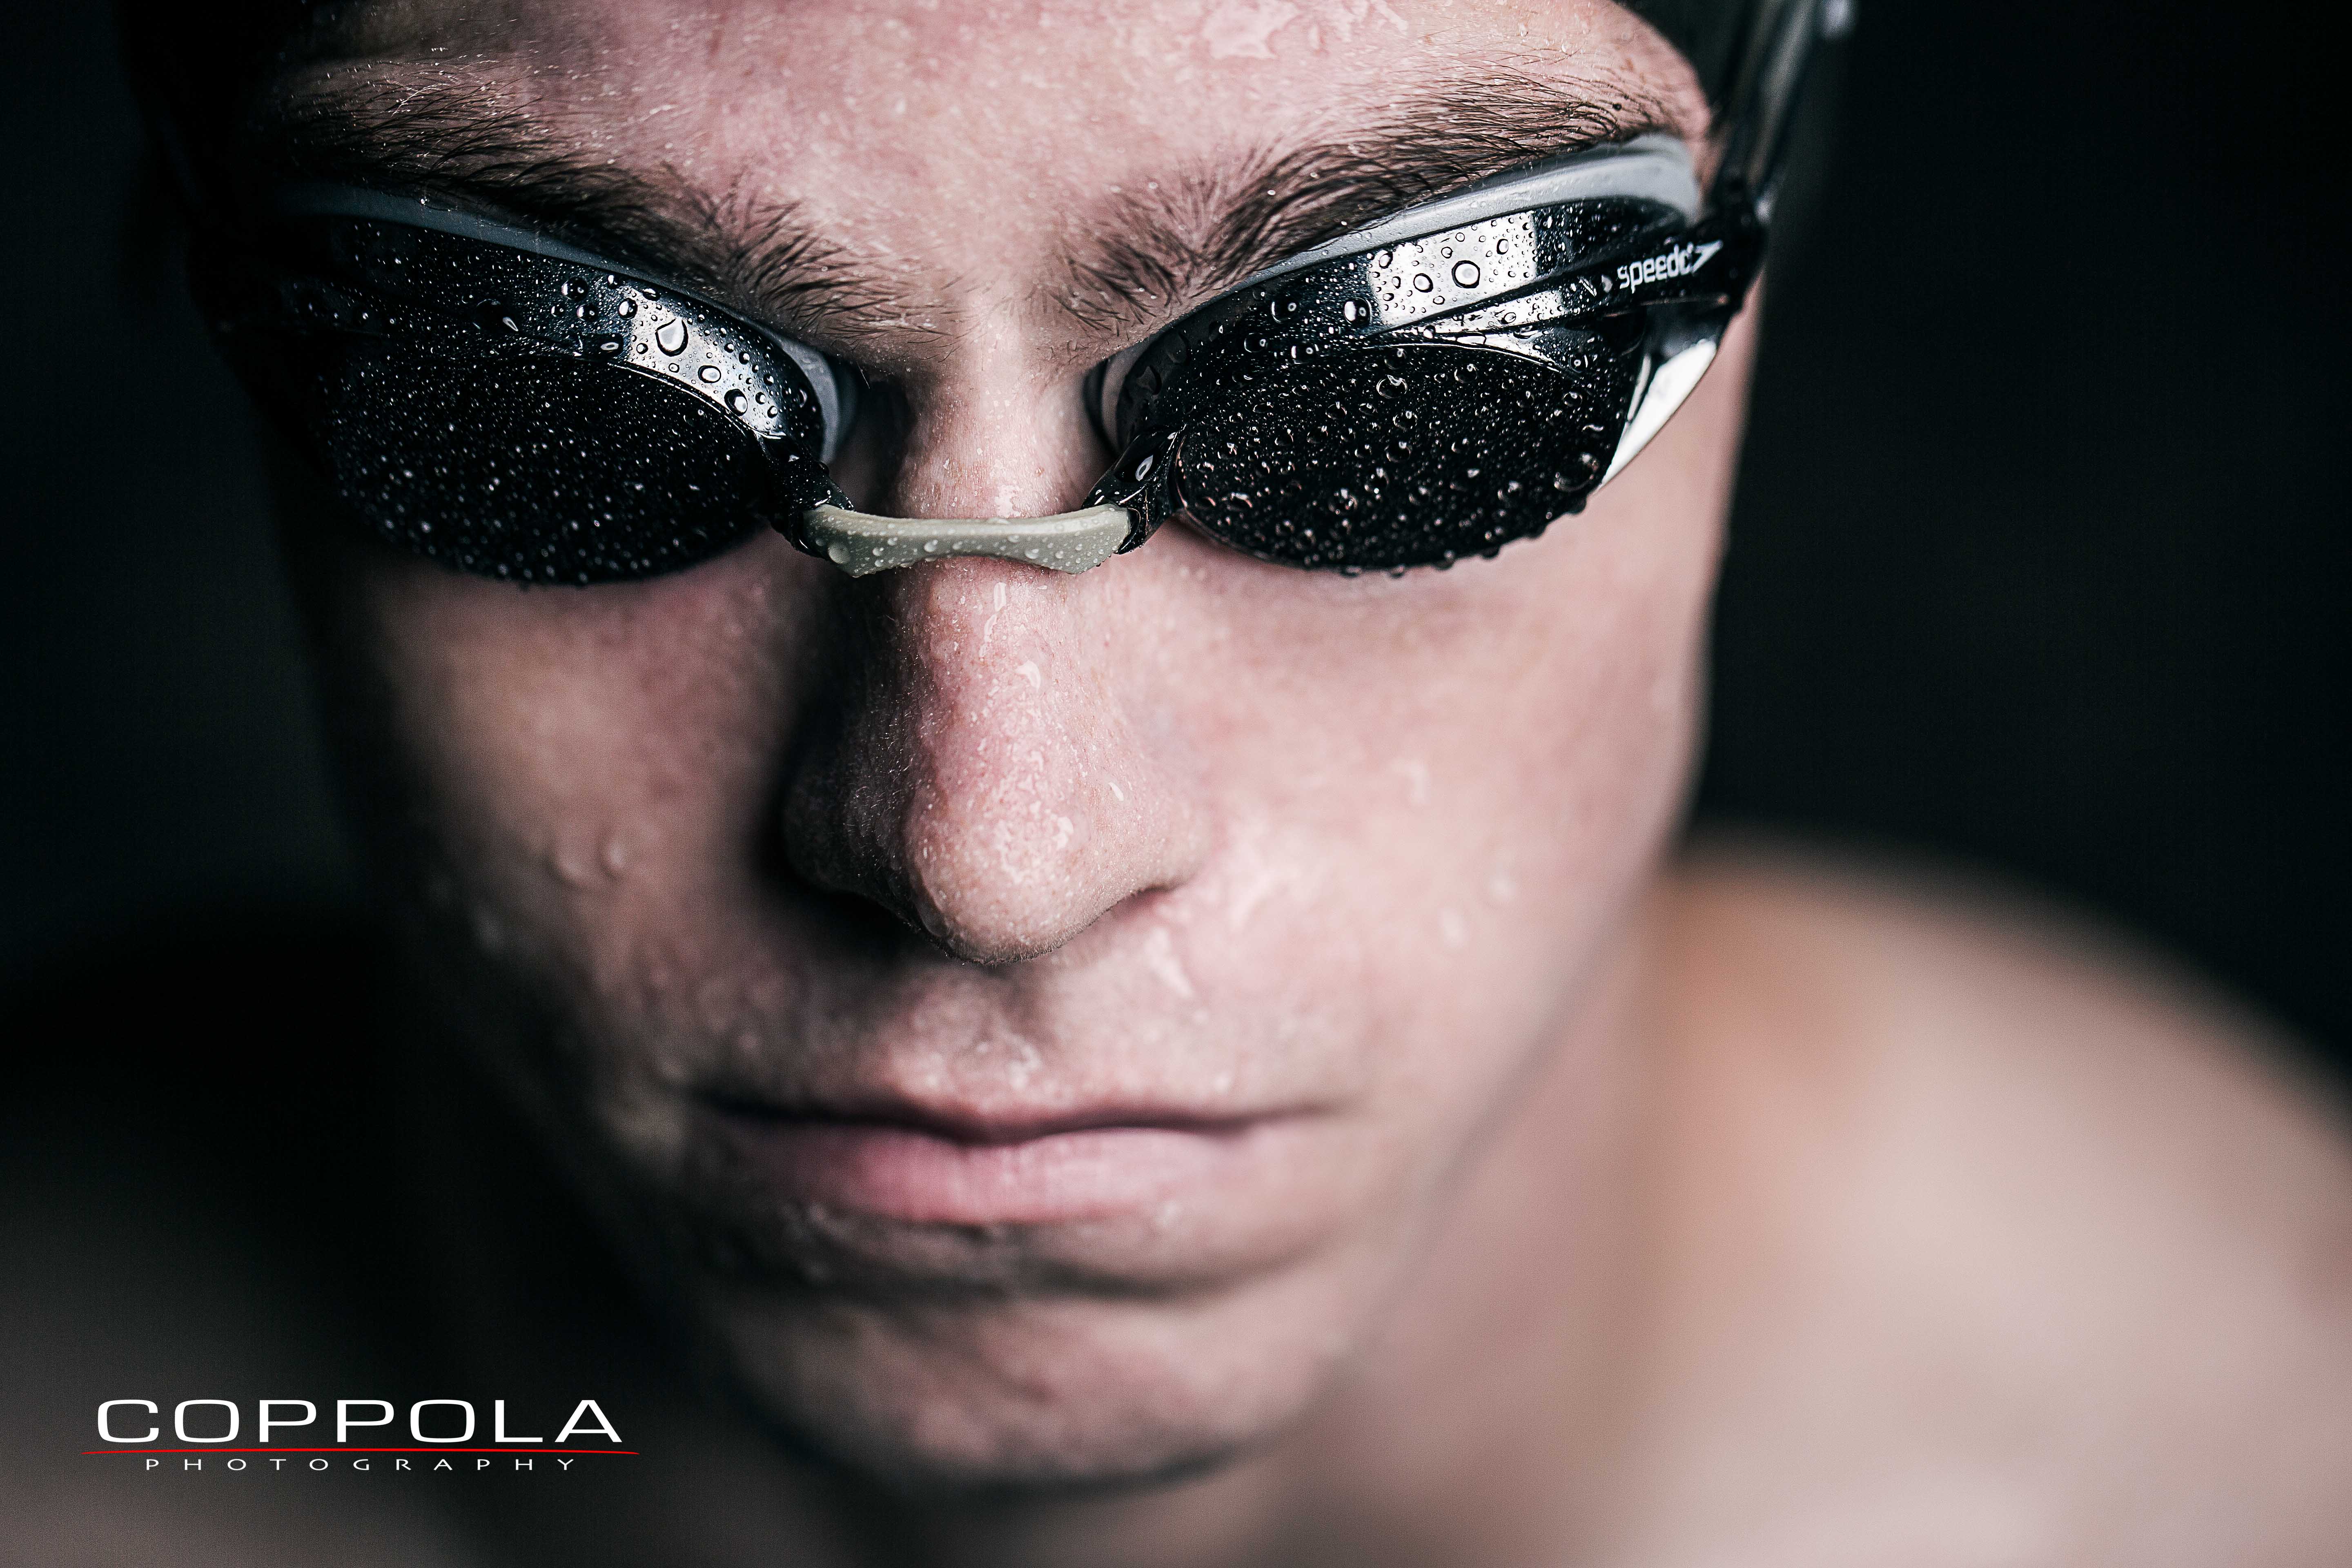 Swimming Athlete Portraits- Personal Project